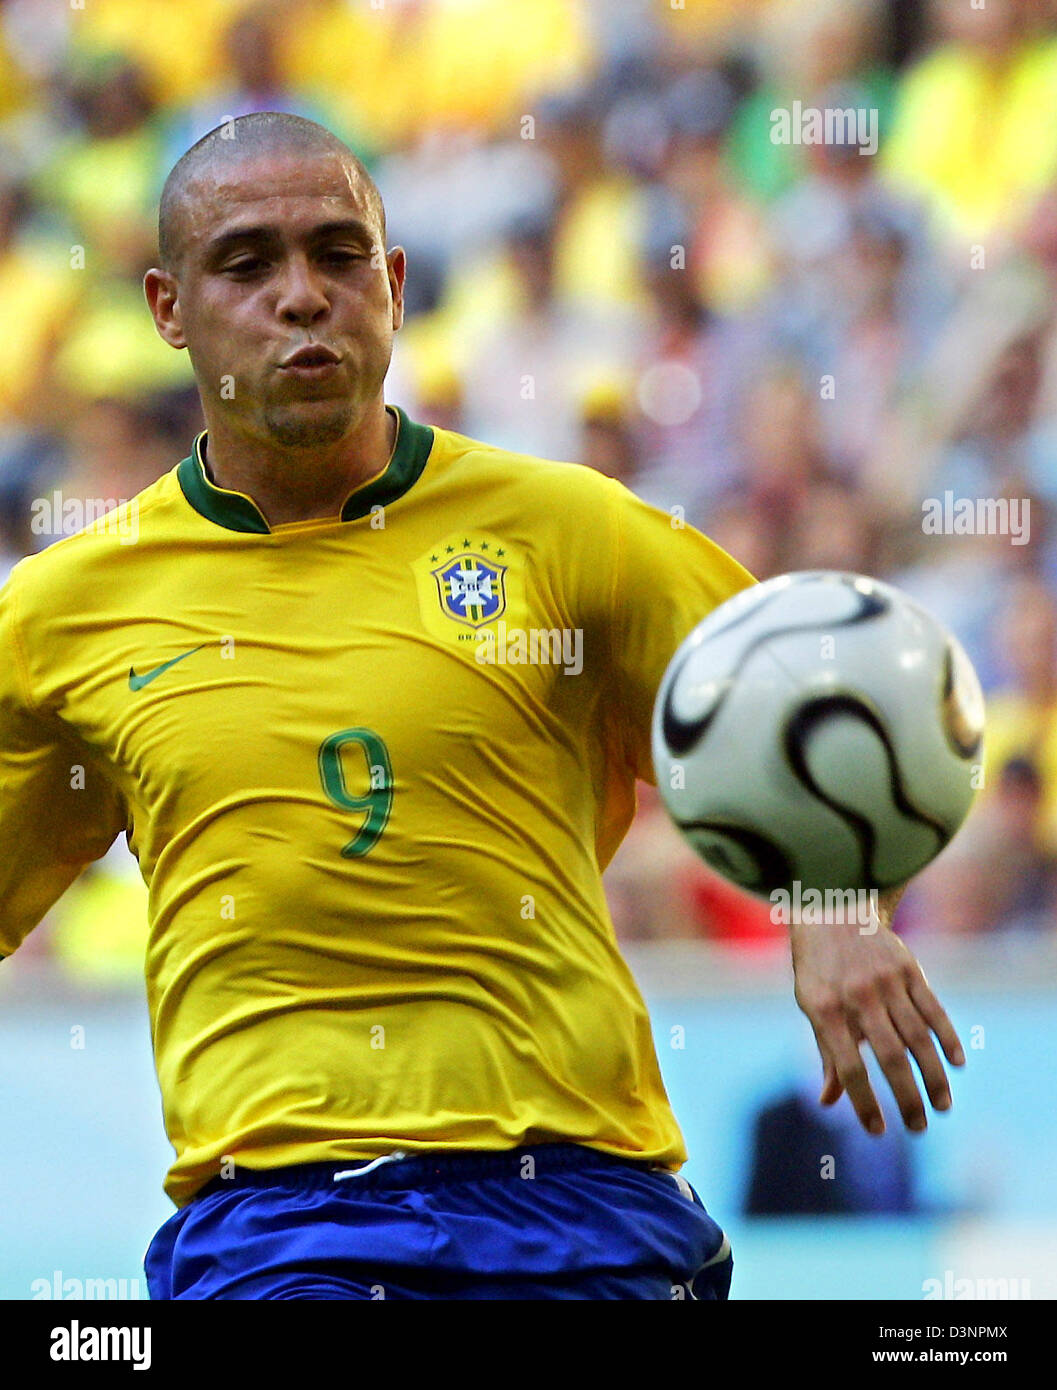 Brazilian Ronaldo eyes the ball during the group F match of the 2006 FIFA World Cup between Brazil and Australia in Munich, Germany, Sunday, 18 June 2006. Photo: MATTHIAS SCHRADER +++ Mobile Services OUT +++ Please refer to FIFA's Terms and Conditions Stock Photo